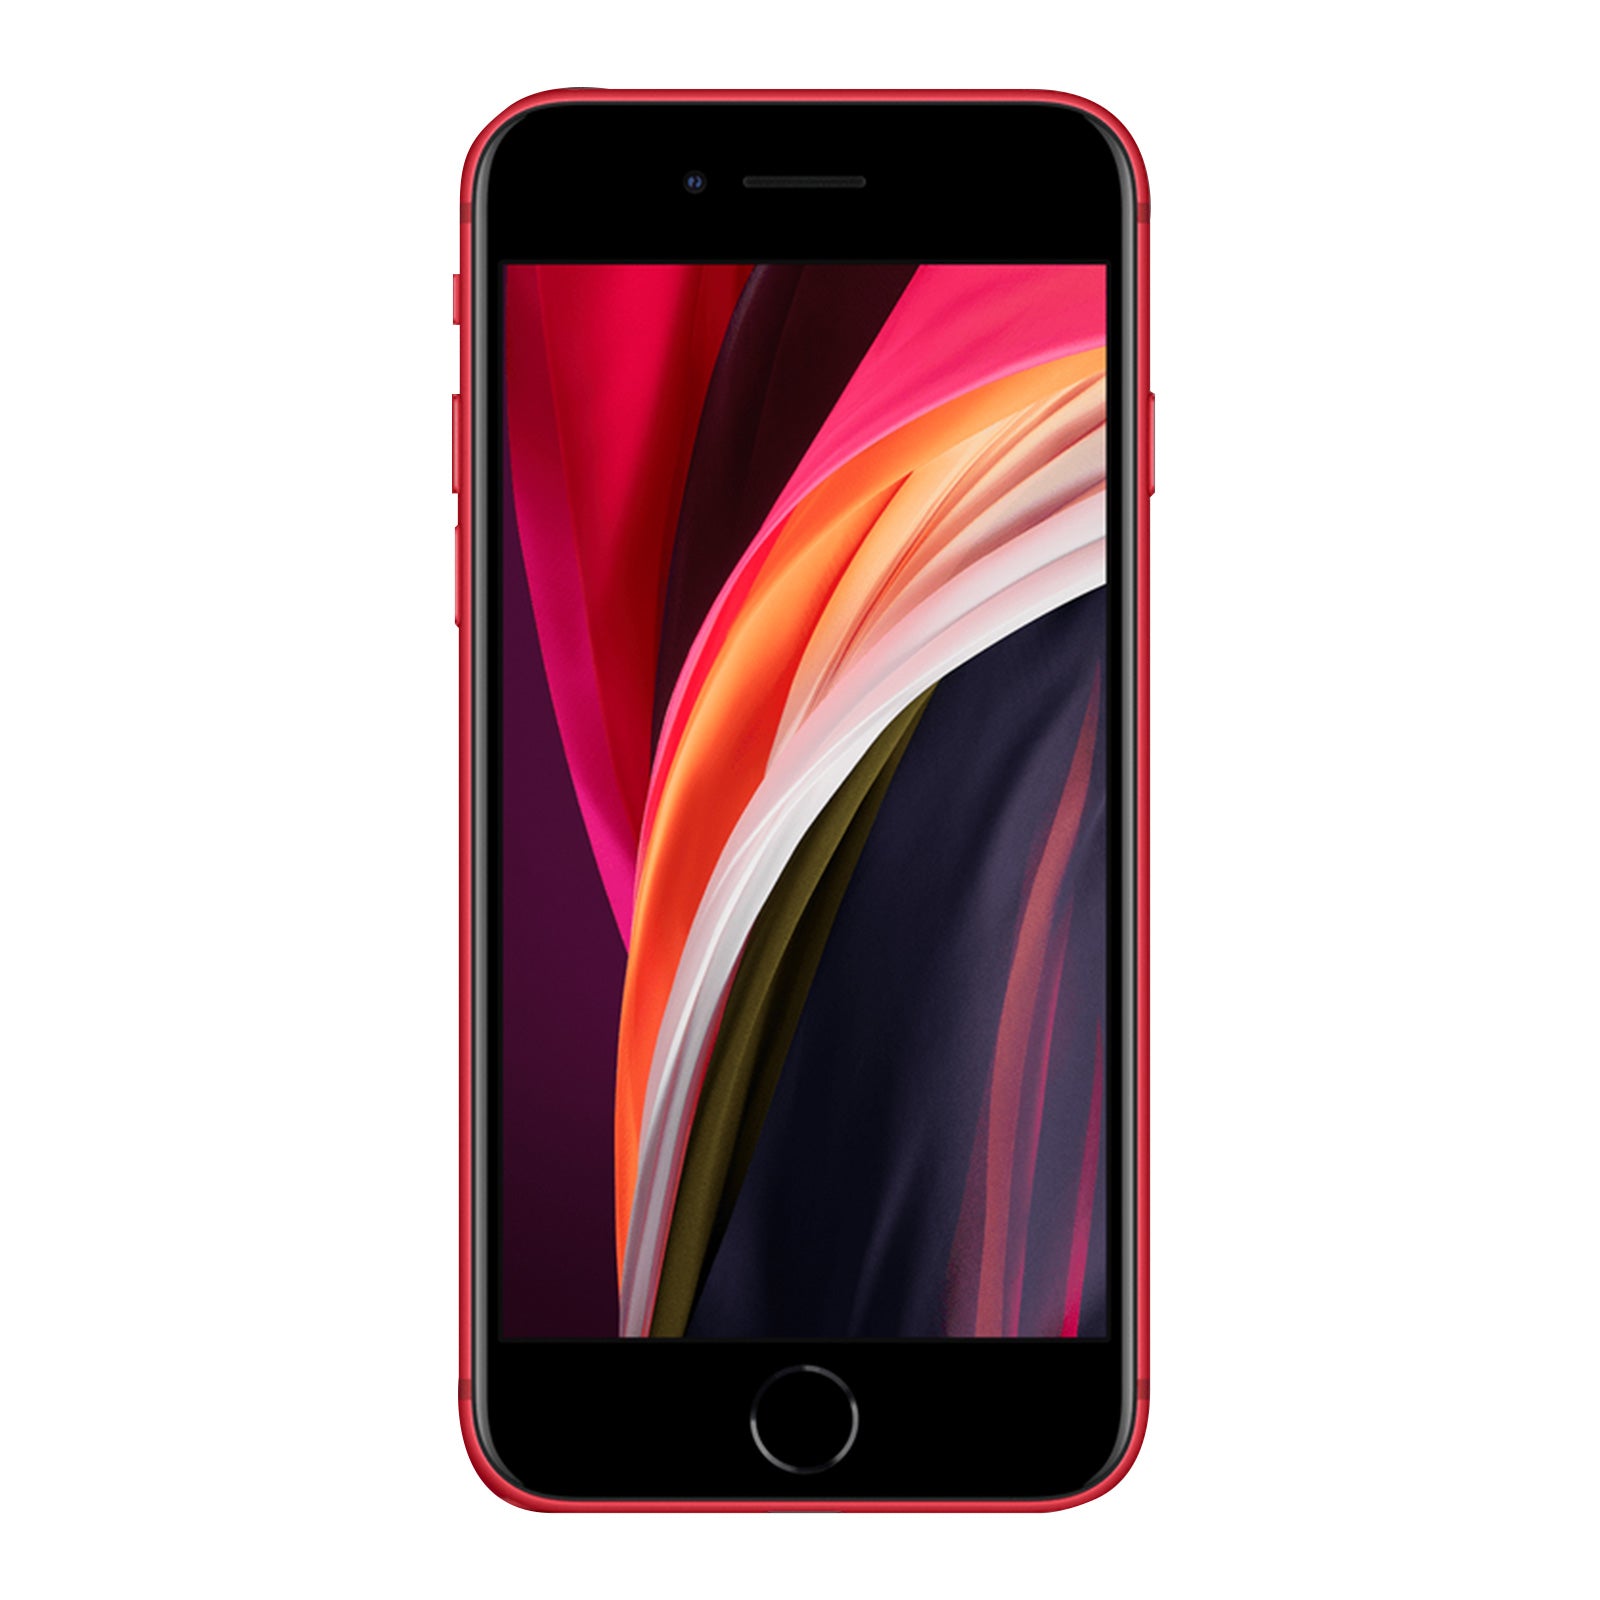 Apple iPhone SE 2nd Gen 256GB Product Red Good Sprint